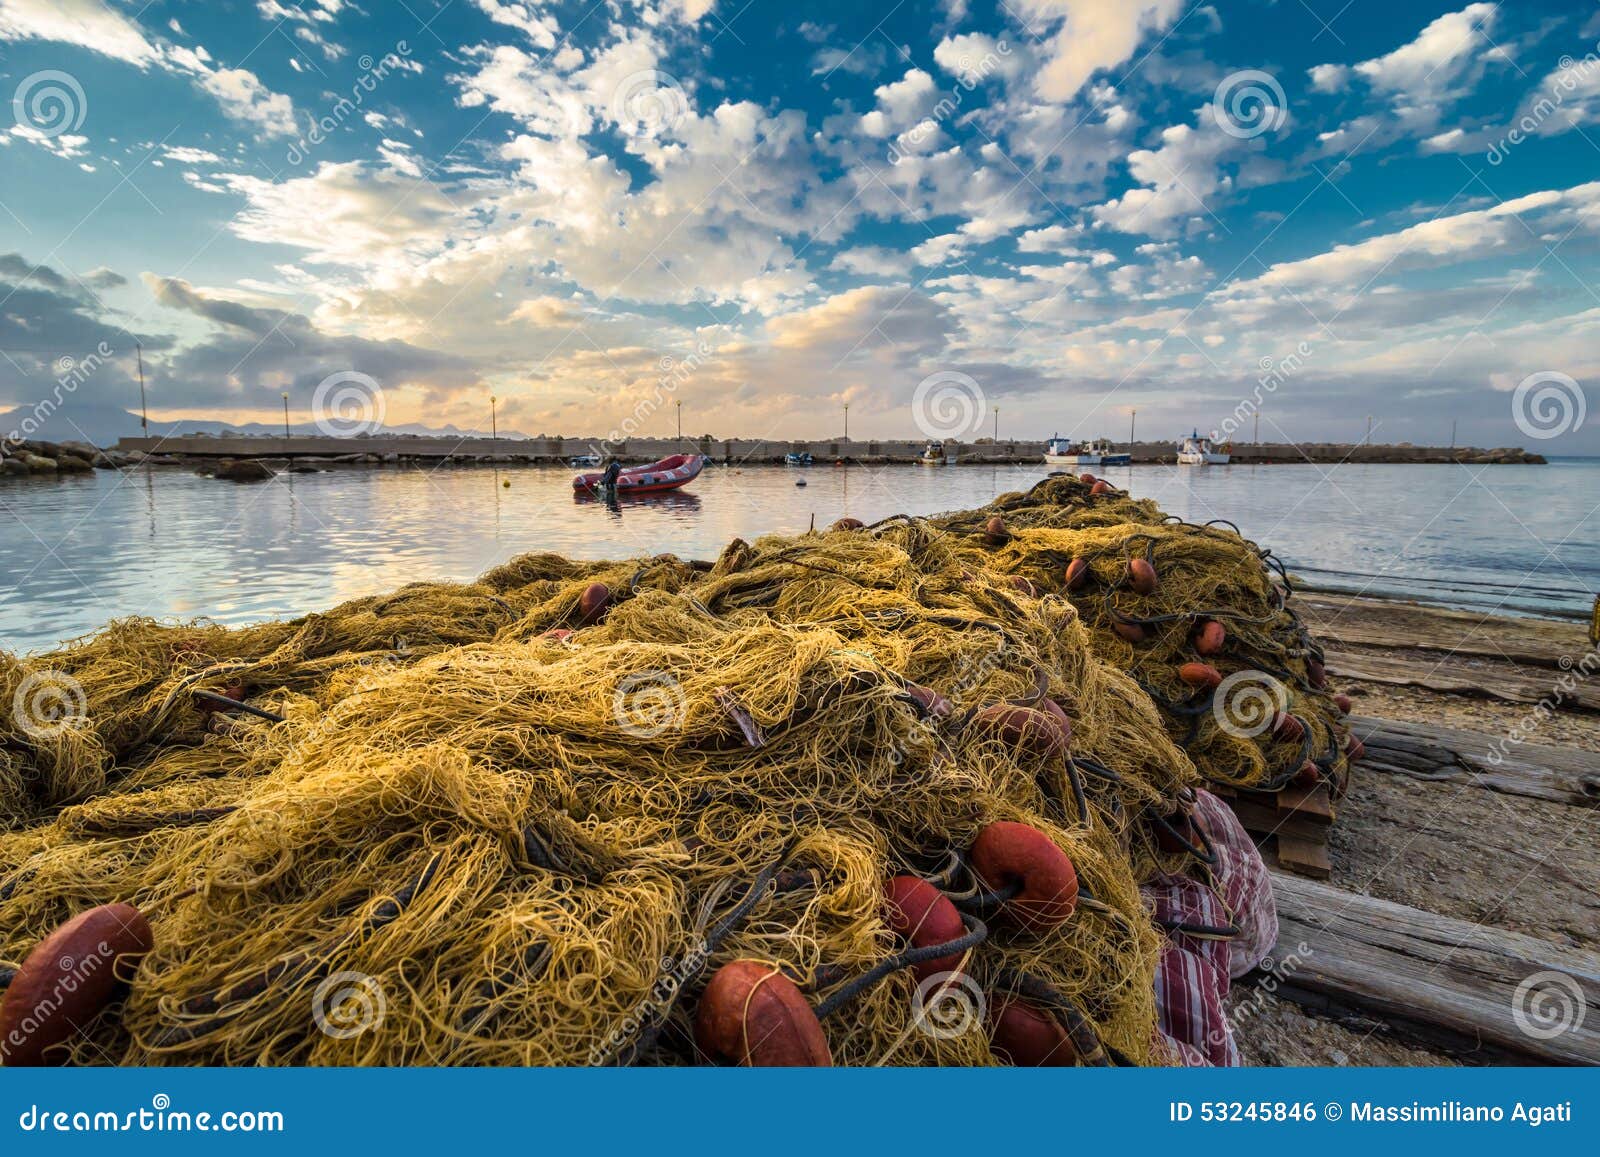 Fishing net in Sicily stock photo. Image of pier, cord - 53245846